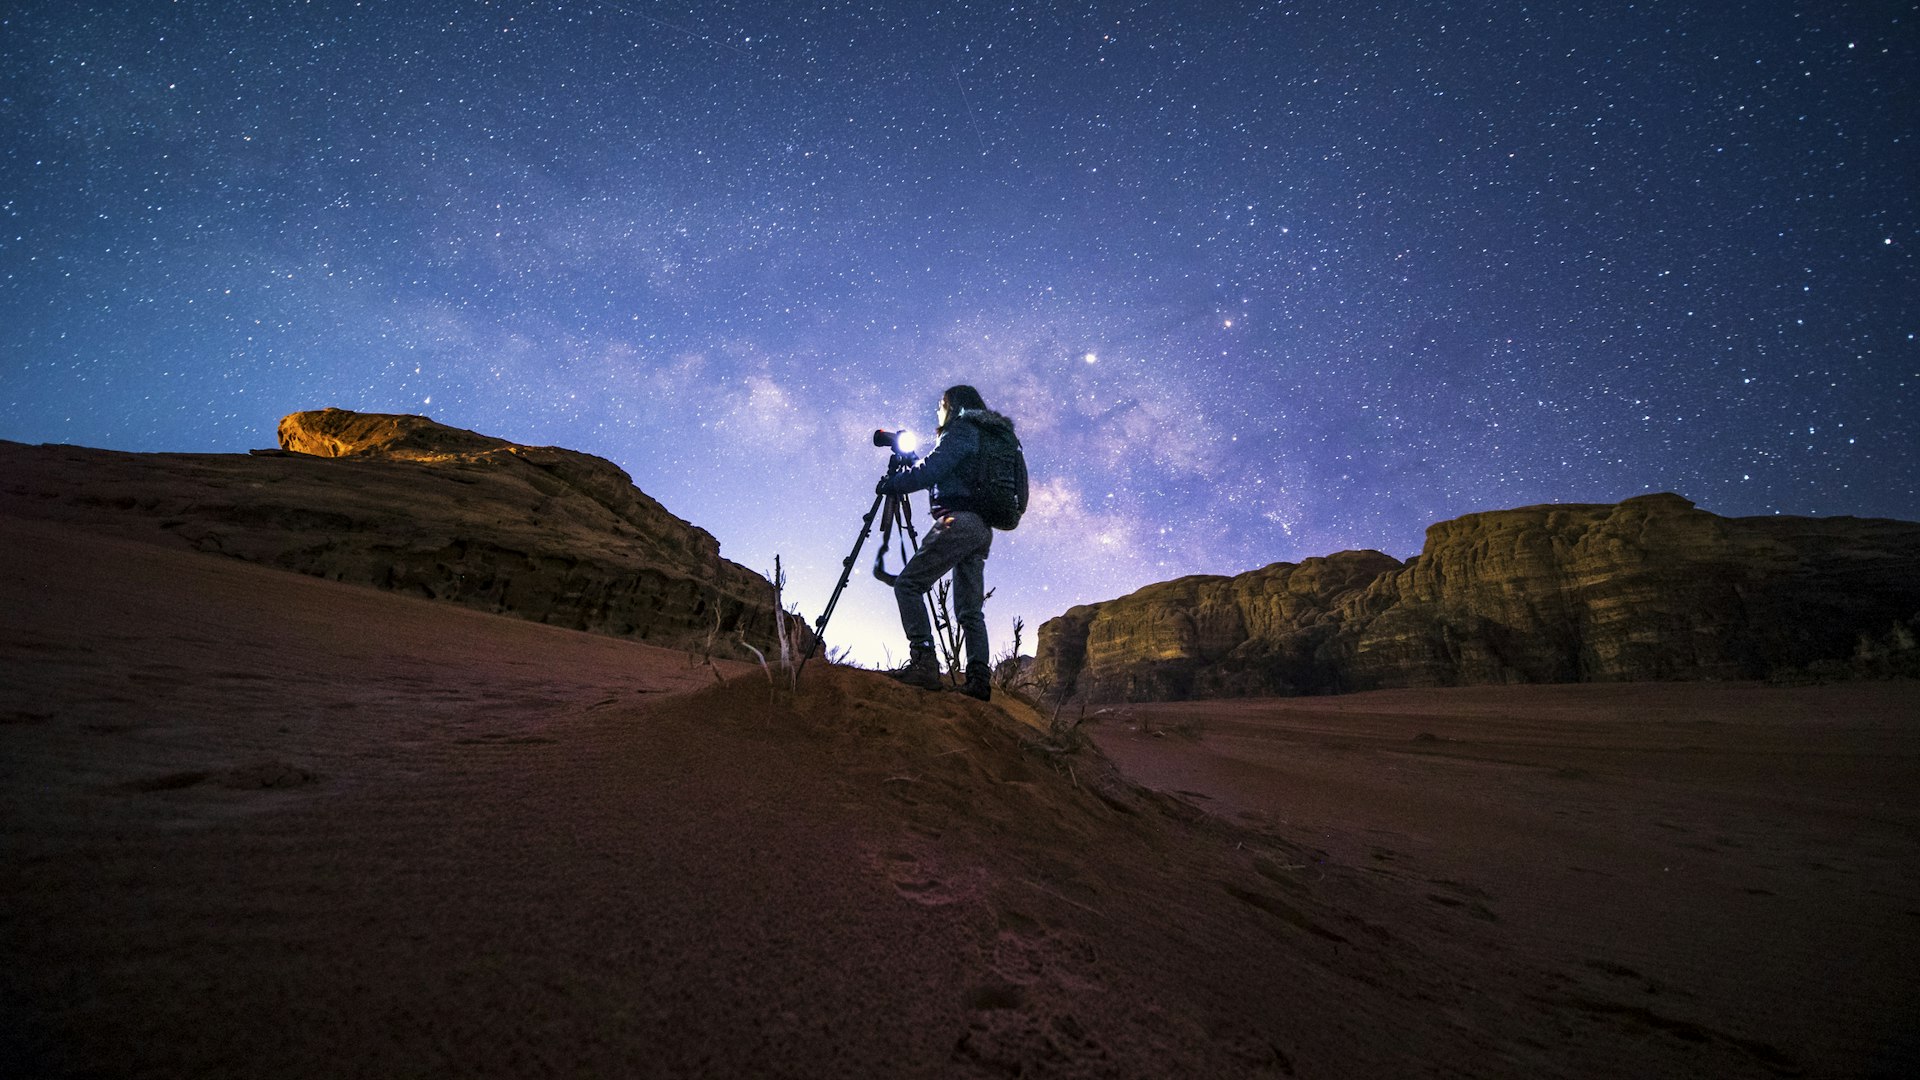 A photographer taking pictures of the night sky in Wai Rum, Jordan